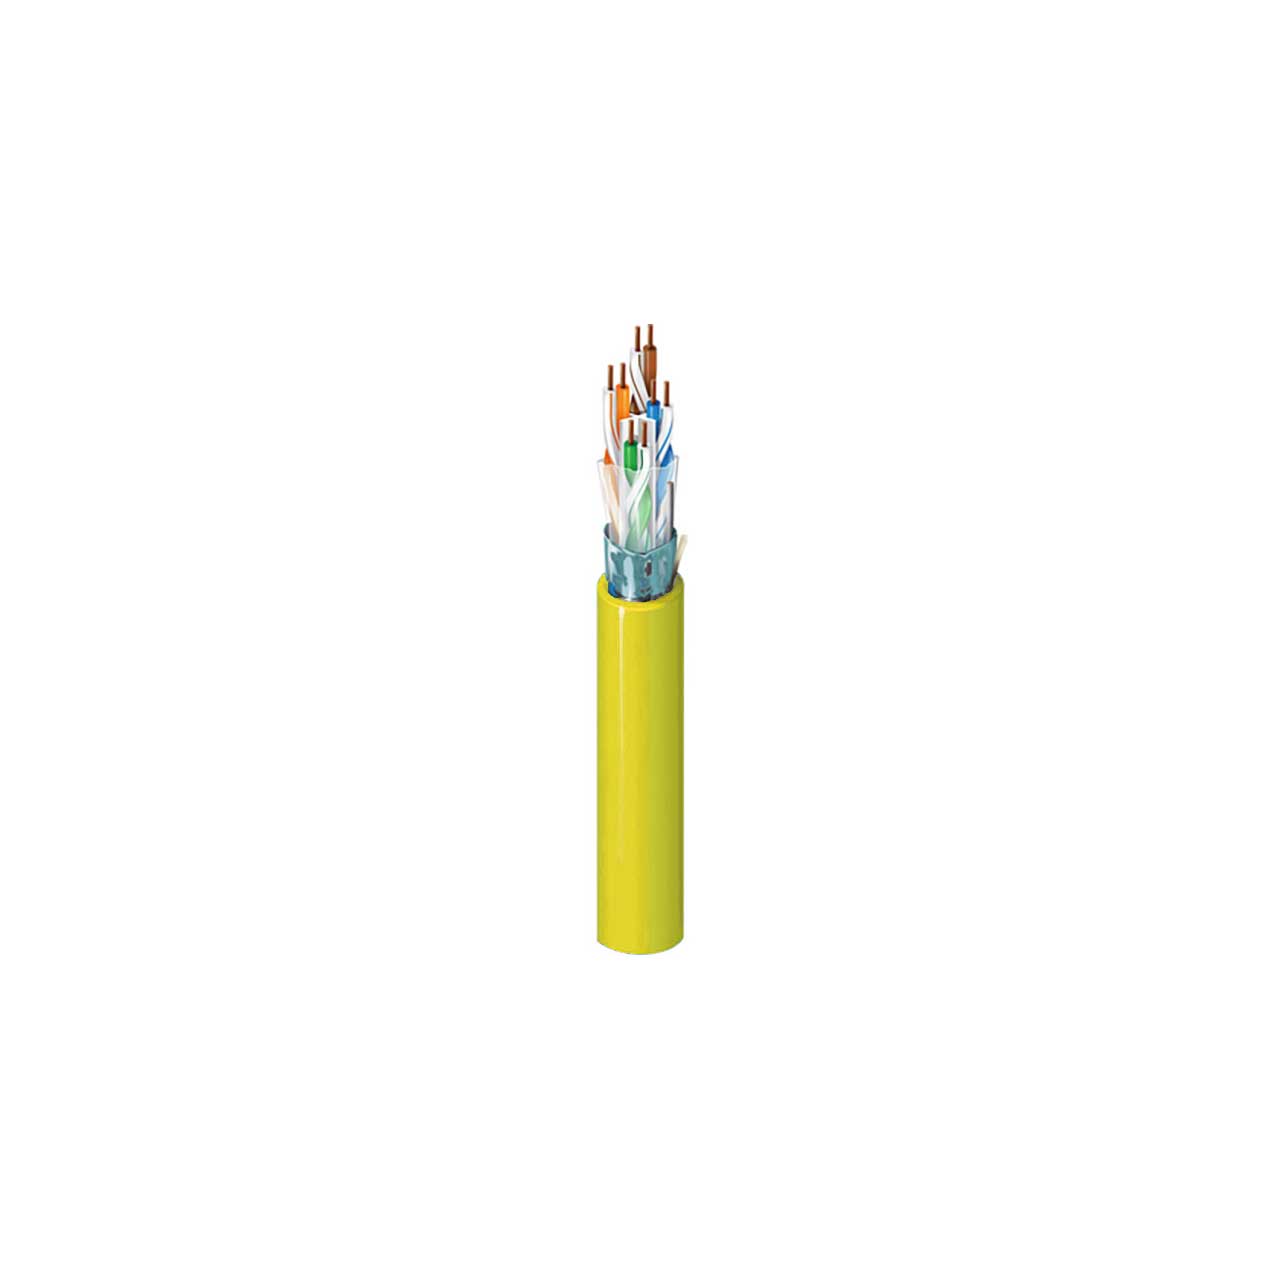 Belden 2412F CAT6 Plus Cable - 4-Pair - F/UTP-Foil Shielded - Riser-CMR - 23 AWG - Yellow - 1000 Foot